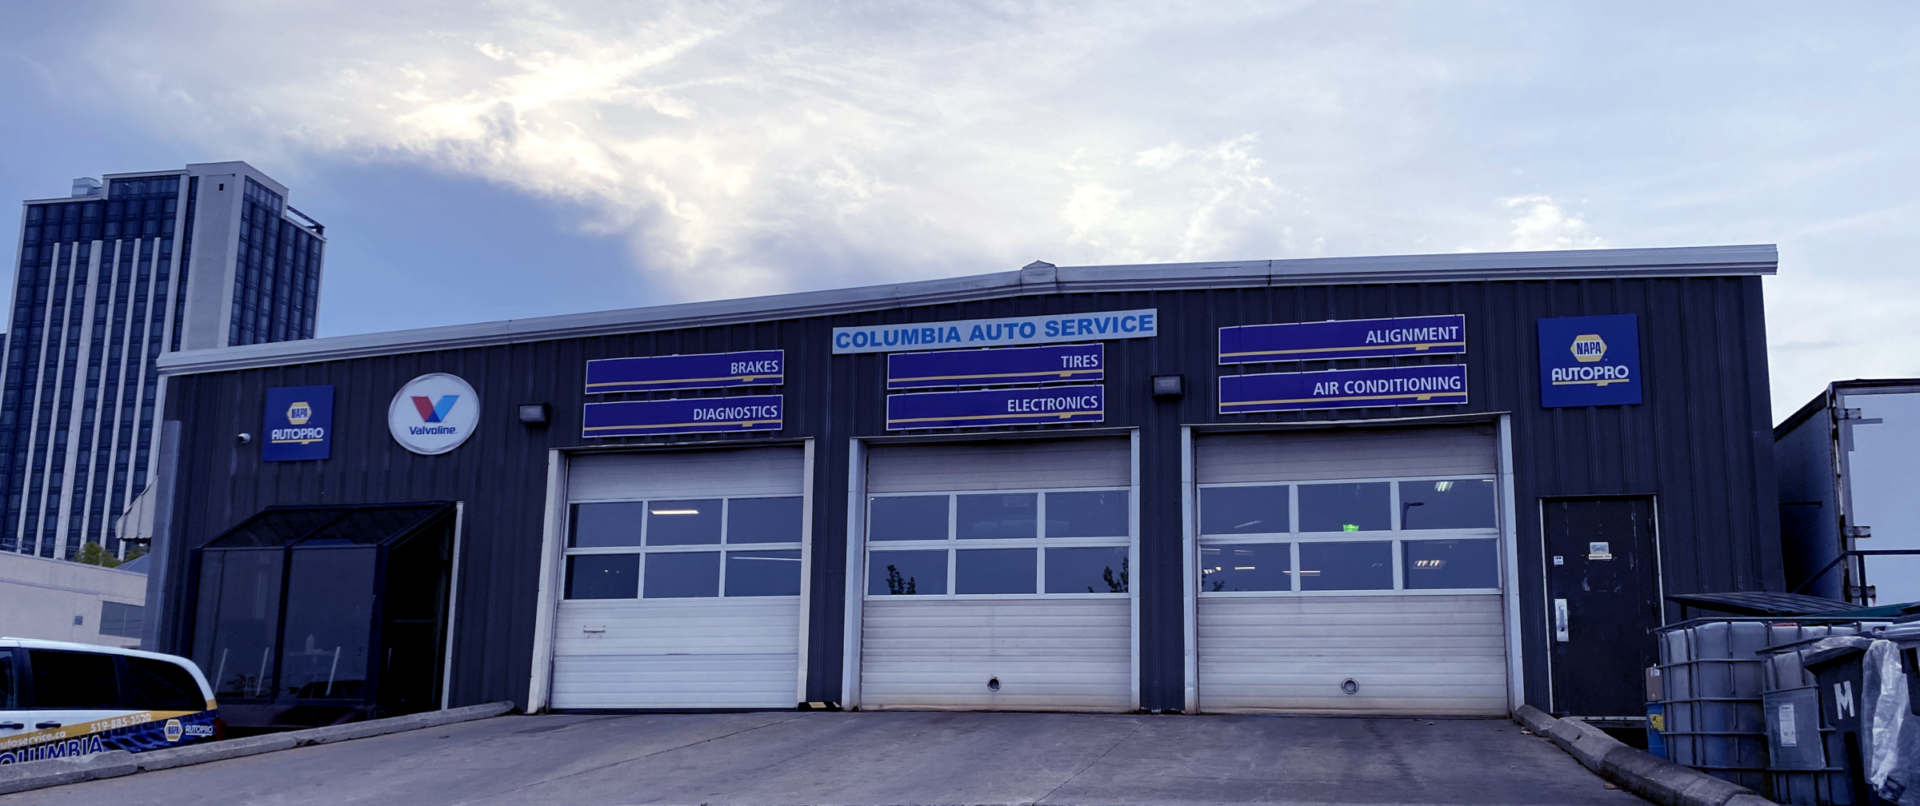 This image shows the exterior of "Columbia Auto Service," a vehicle repair shop offering services like brakes, alignment, and air conditioning, with a clear sky above.